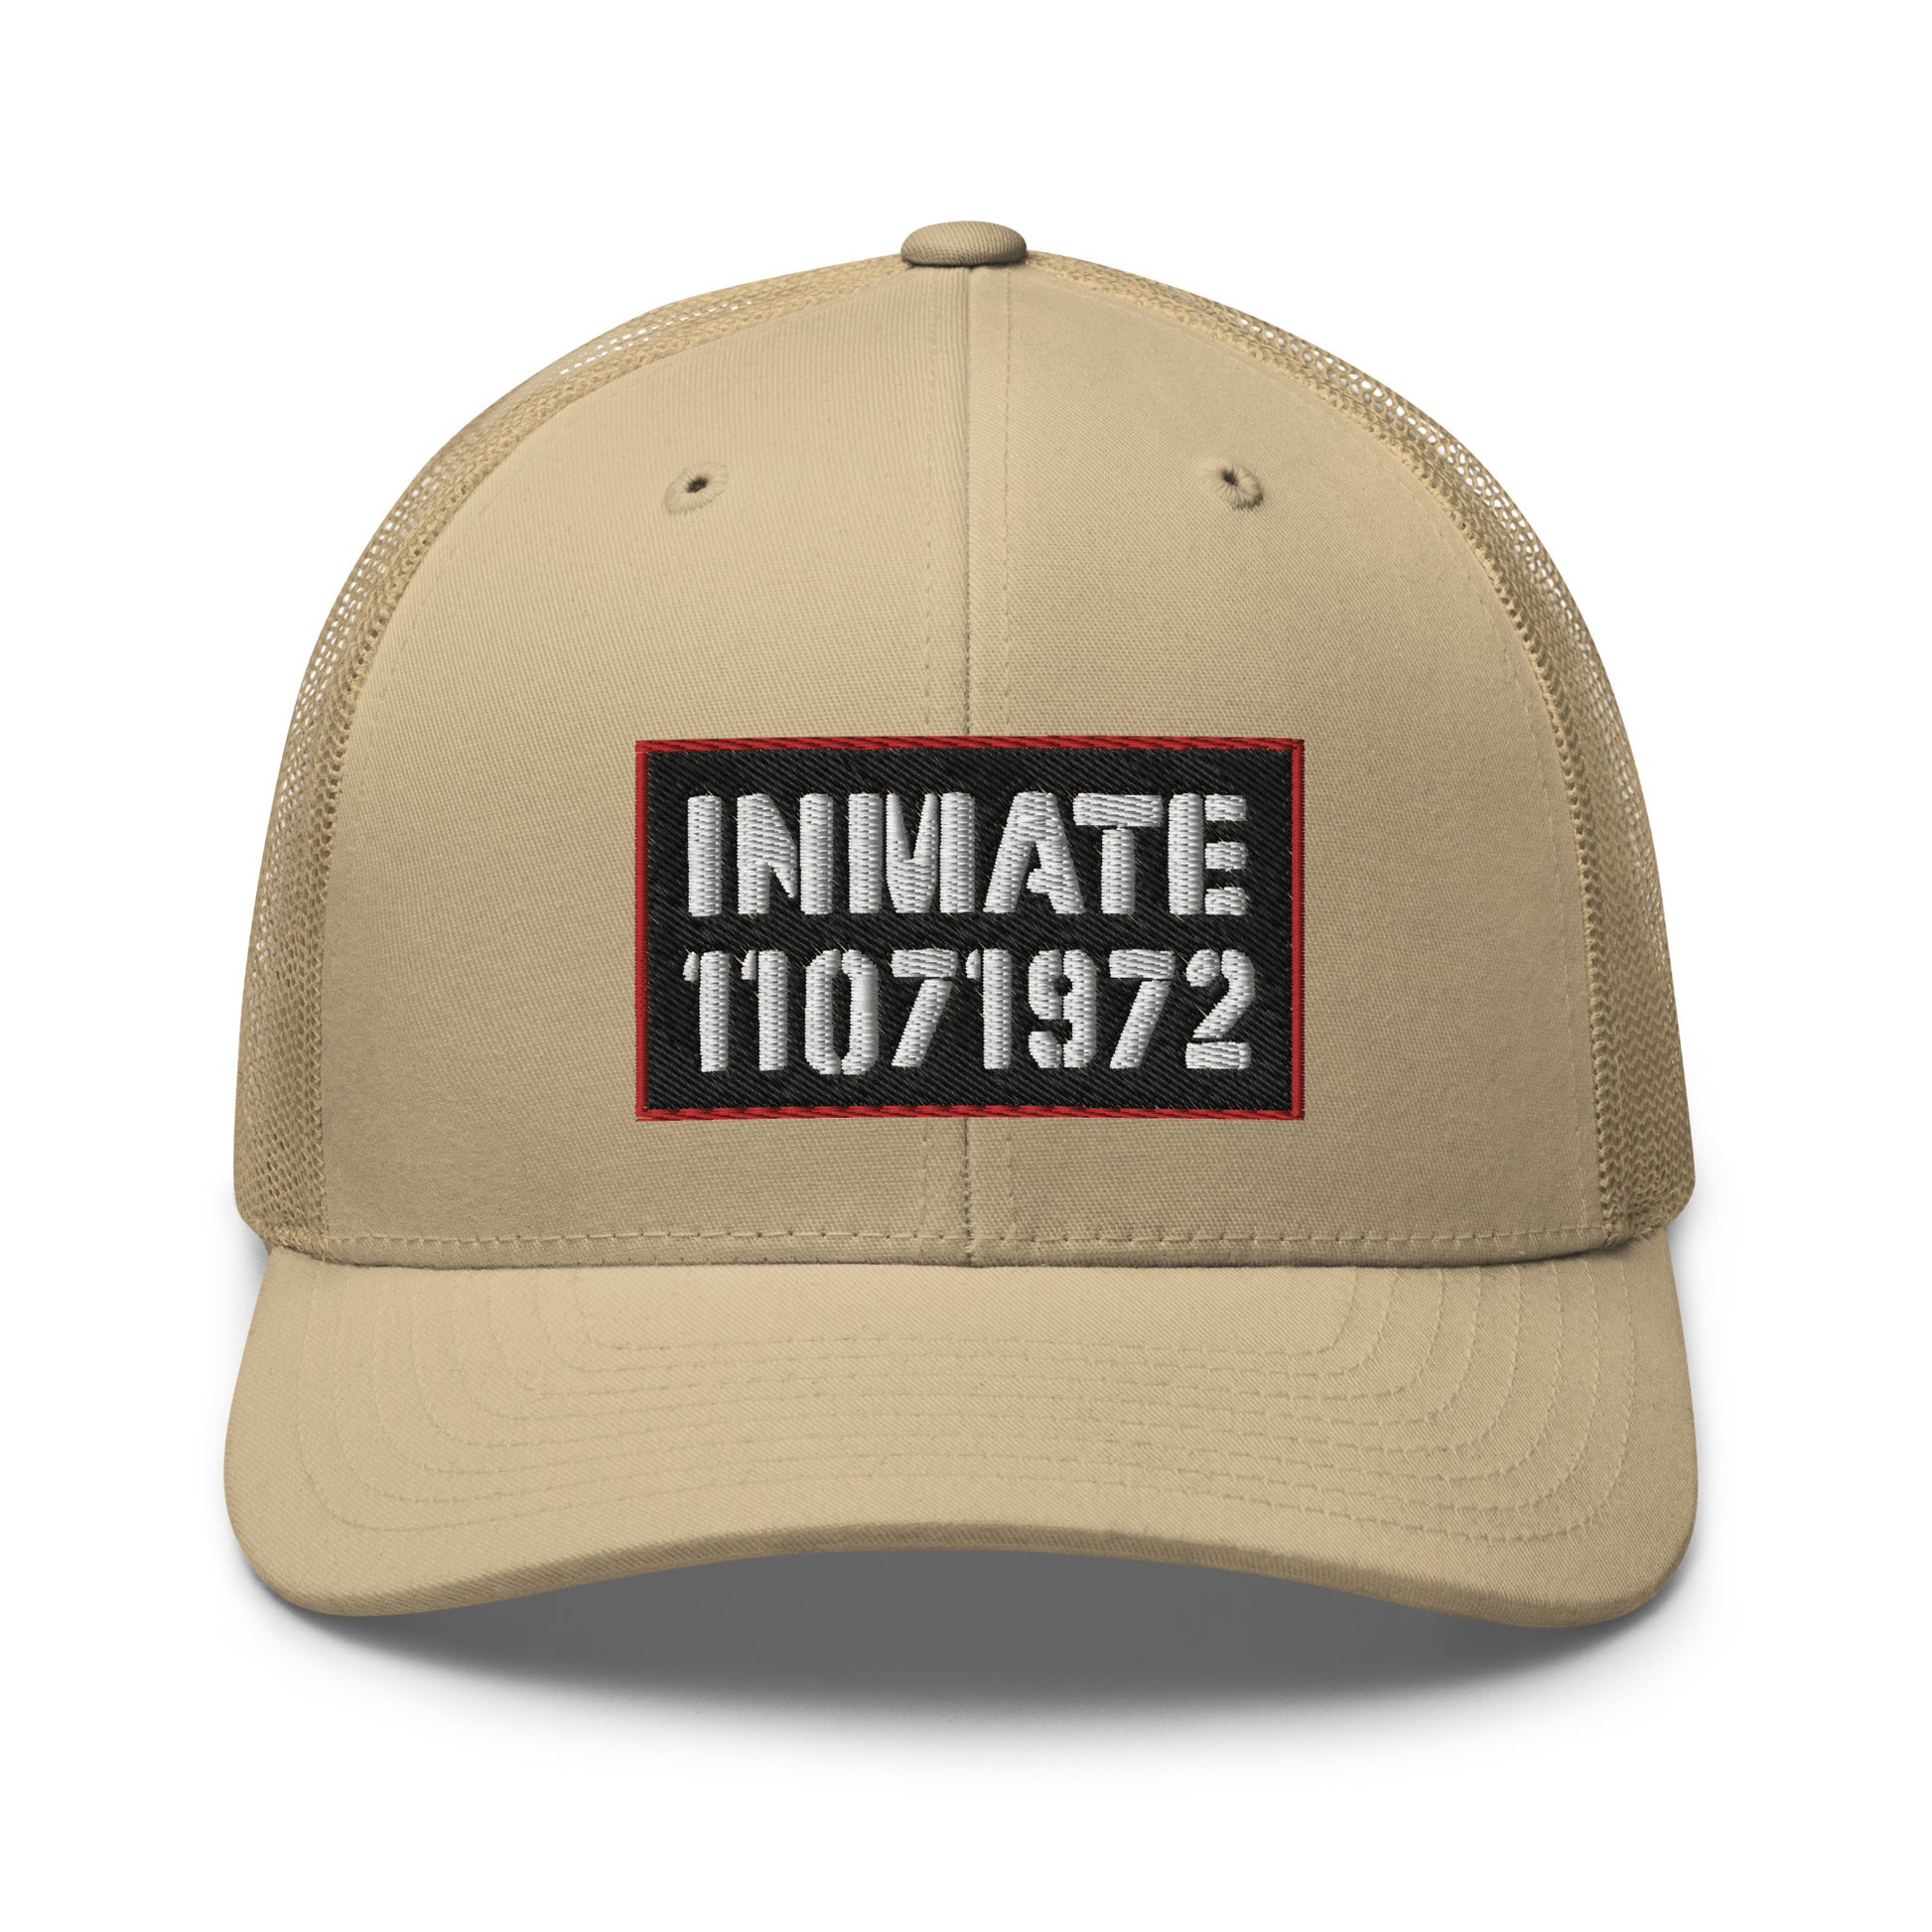 6-panel khaki cap with the word 'inmate' along with an inmate number embroidered on the front